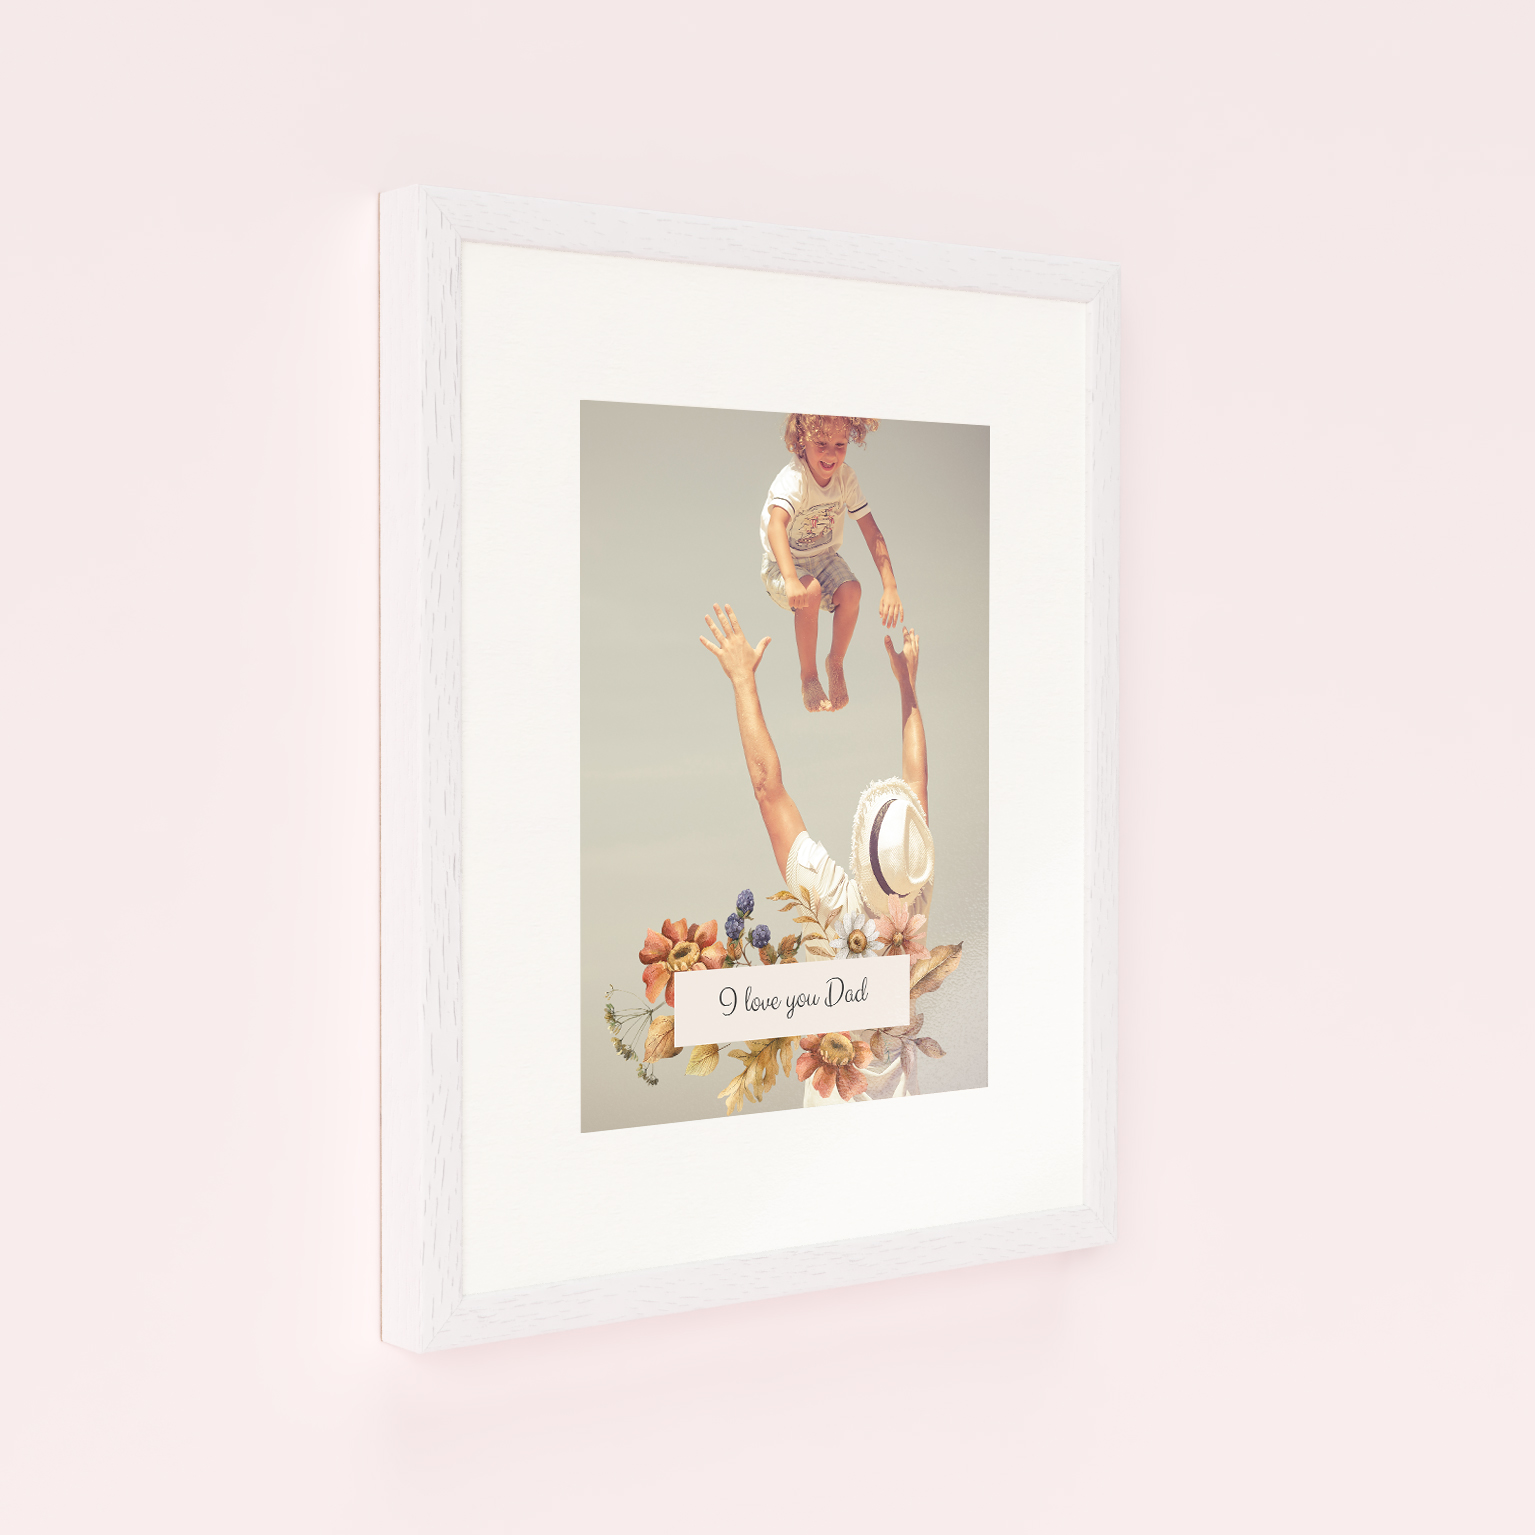 Photo of a framed photo print called 'Dad’s Frame'. It is 40cm x 30cm in size, in a Portrait orientation. It has space for 1 photos.